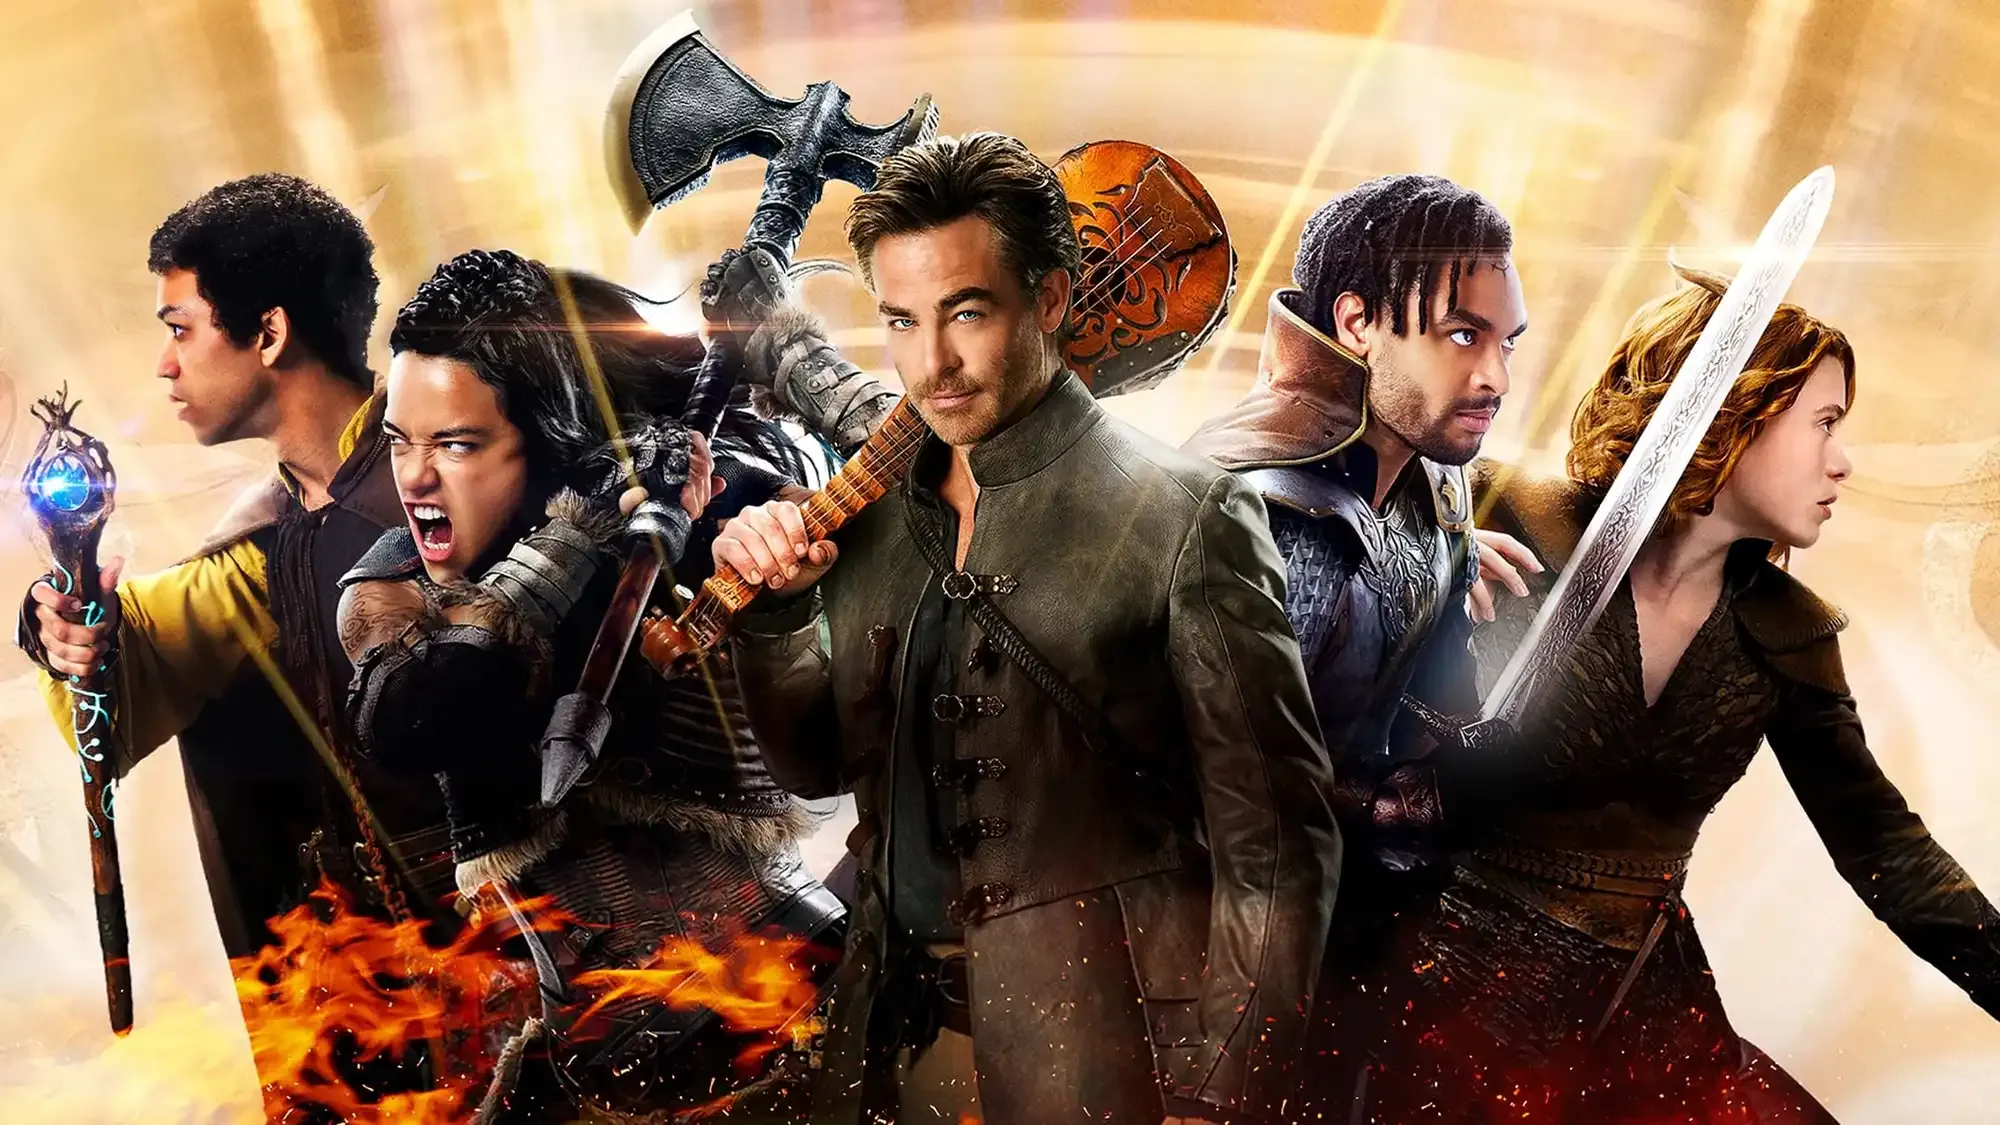 Dungeons & Dragons: Honor Among Thieves movie review